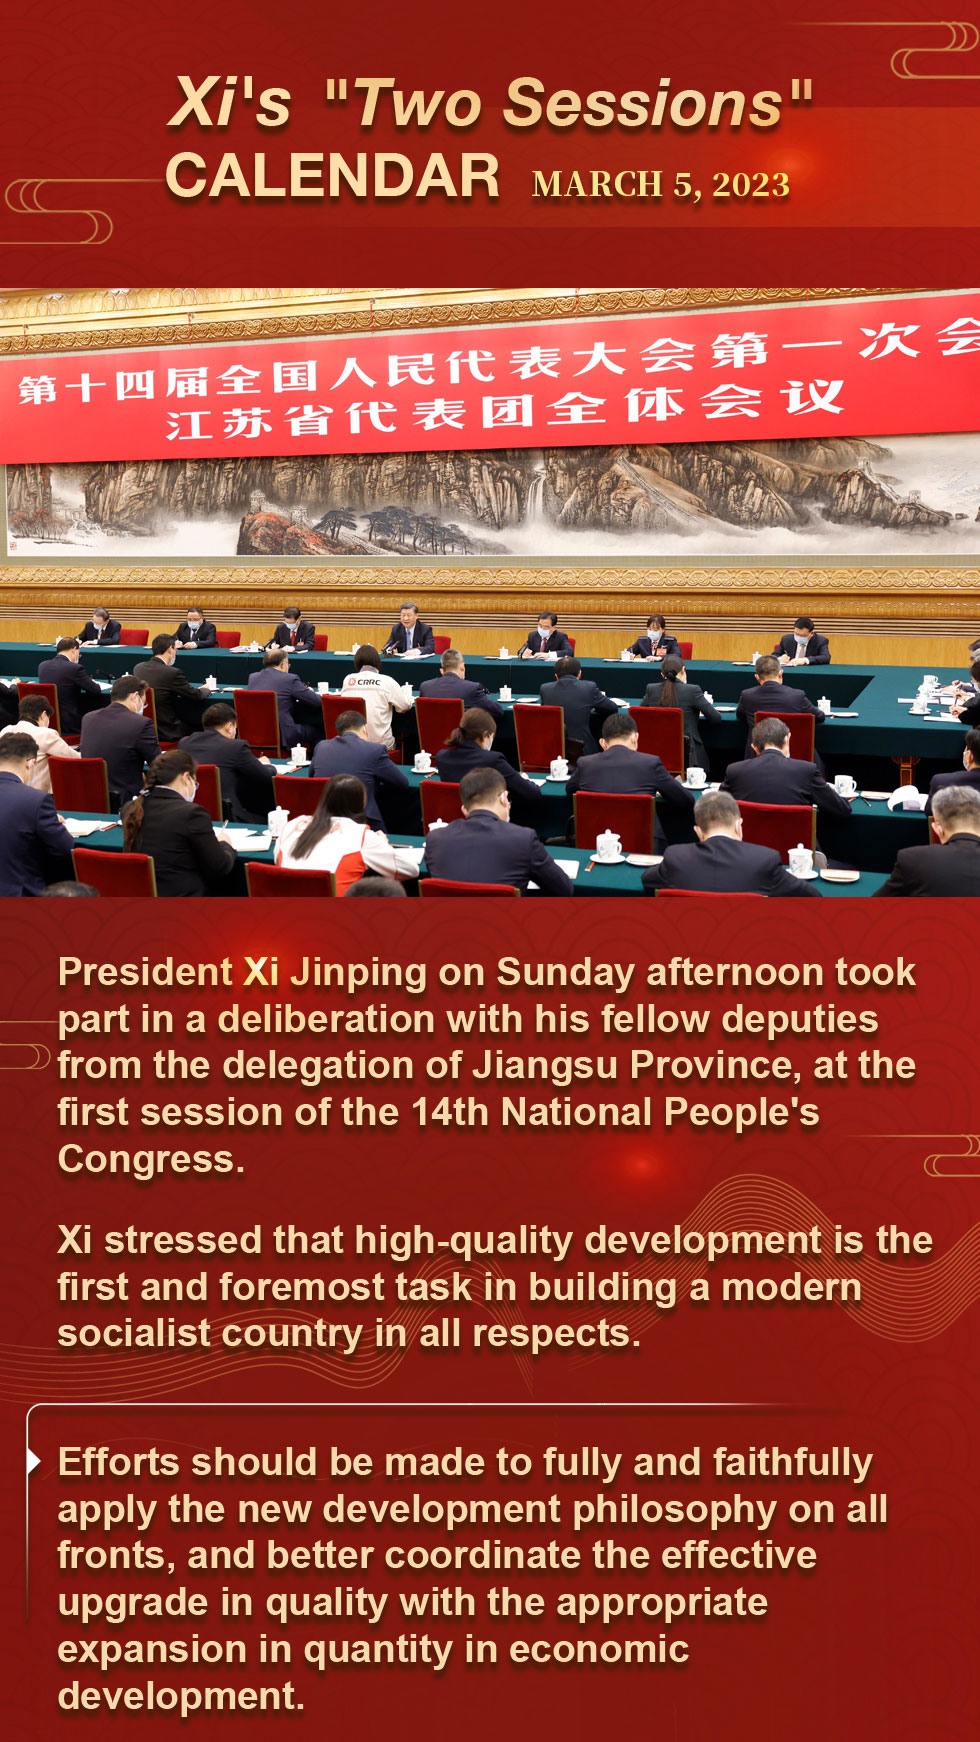 Xi's "Two Sessions" Calendar: Xi takes part in deliberation of Jiangsu delegation